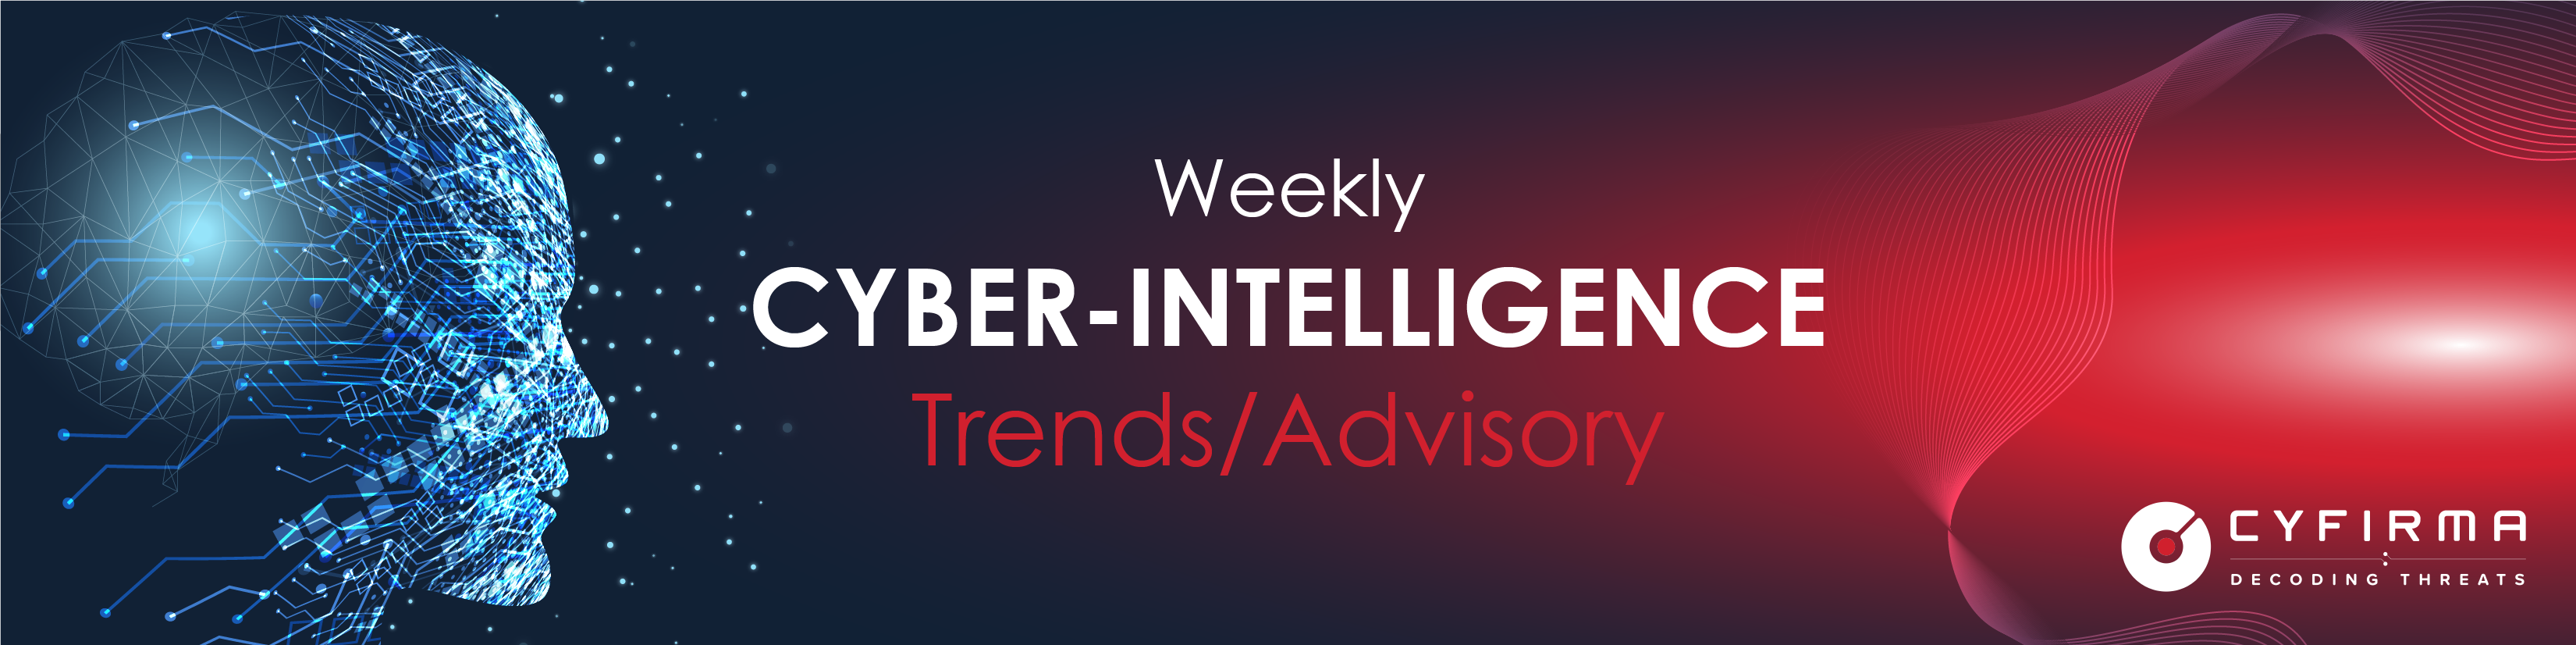 Weekly Intelligence Trends and Advisory | Threat Actor in Focus | Rise in Malware, Ransomware, Phishing | Vulnerability and Exploits – 12 Dec 2021